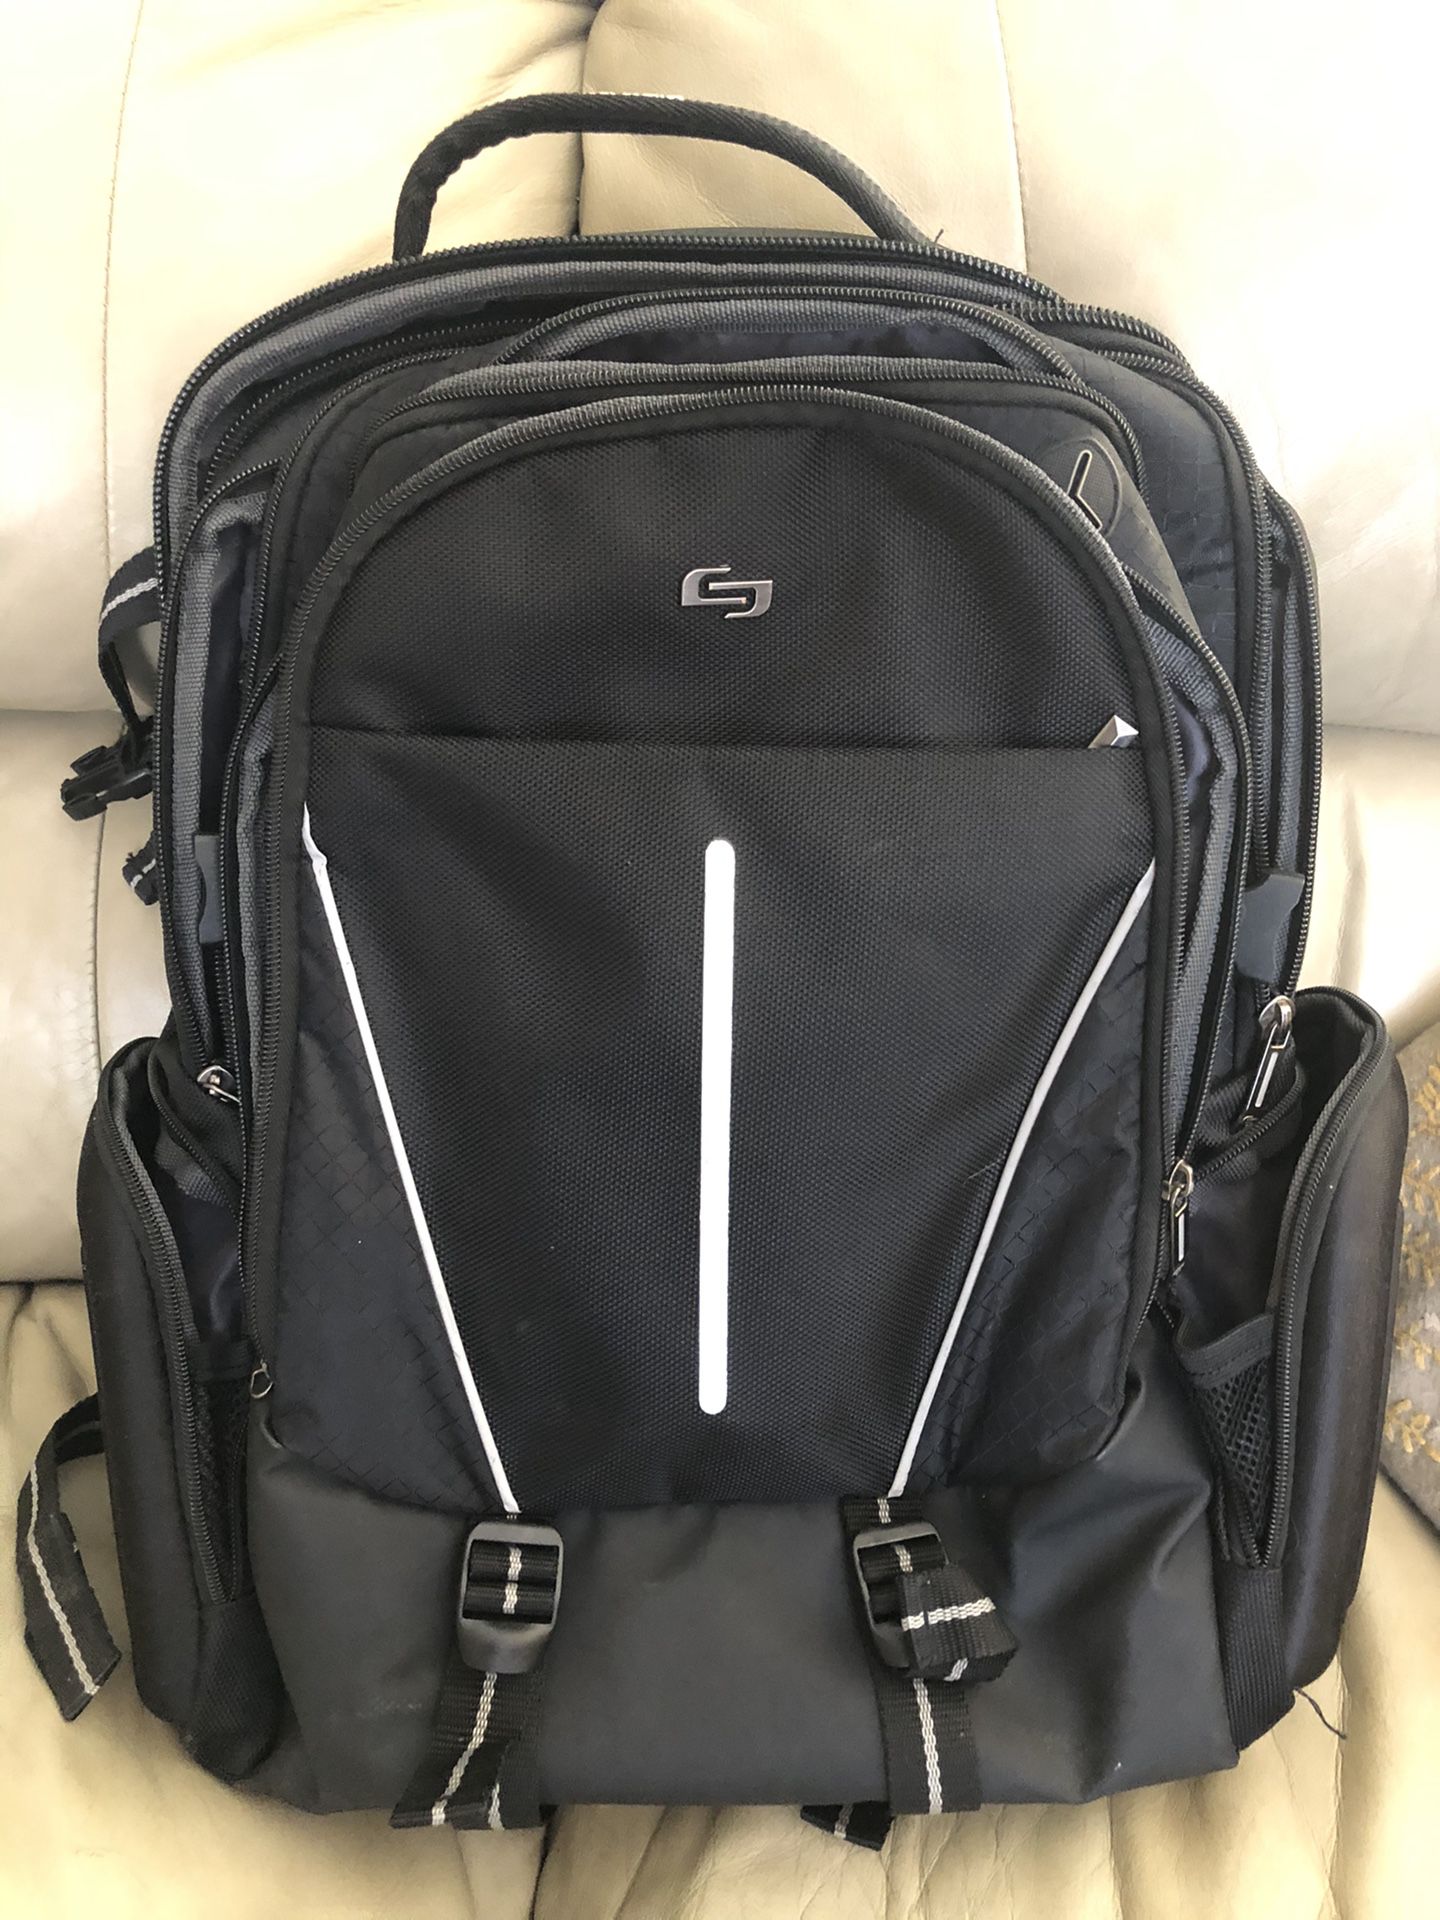 Solo laptop backpack - barely used